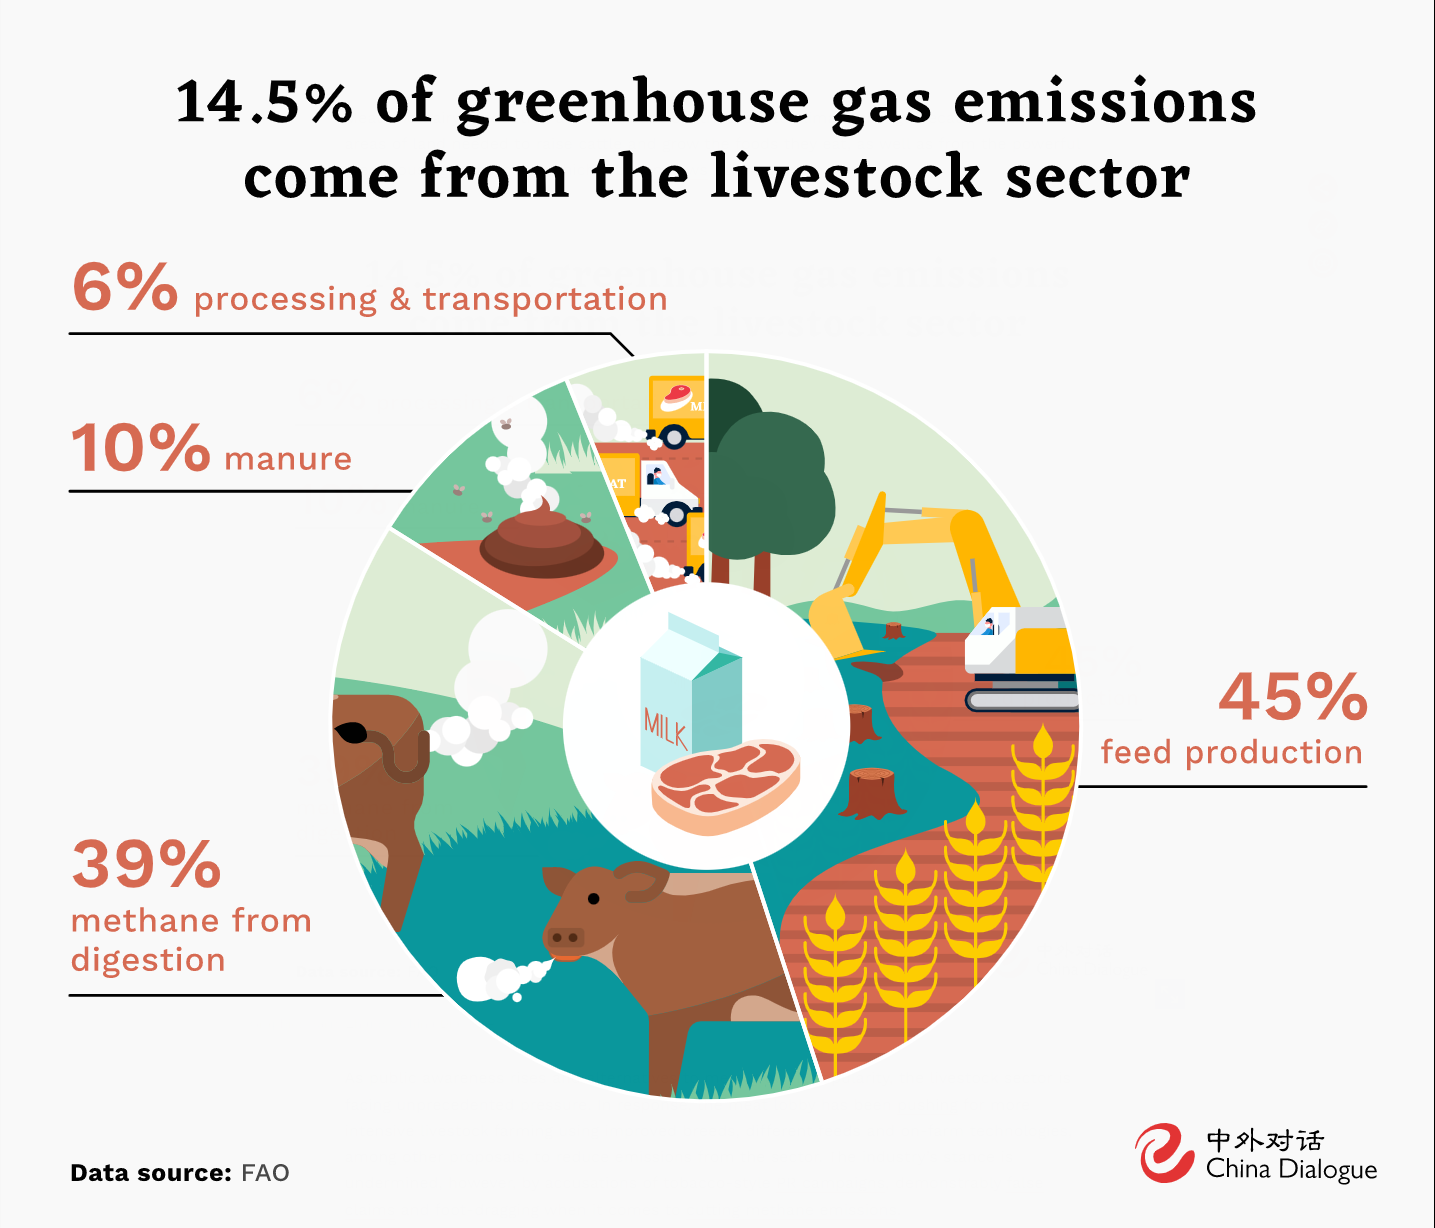 Greenhouse gas emissions from the livestock industry